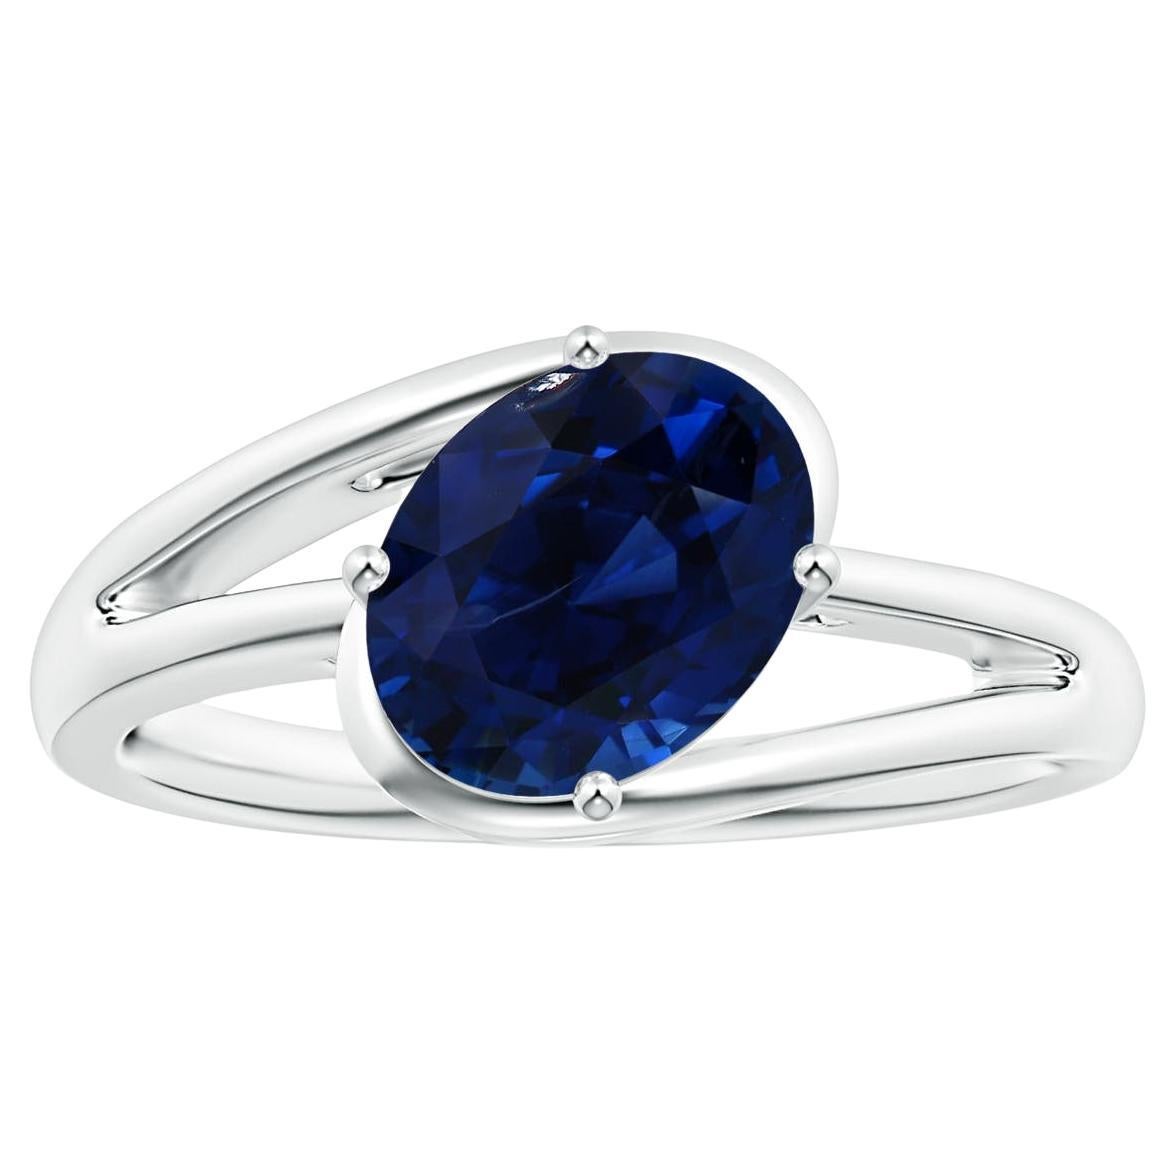 ANGARA GIA Certified Natural Sapphire Solitaire Ring in White Gold